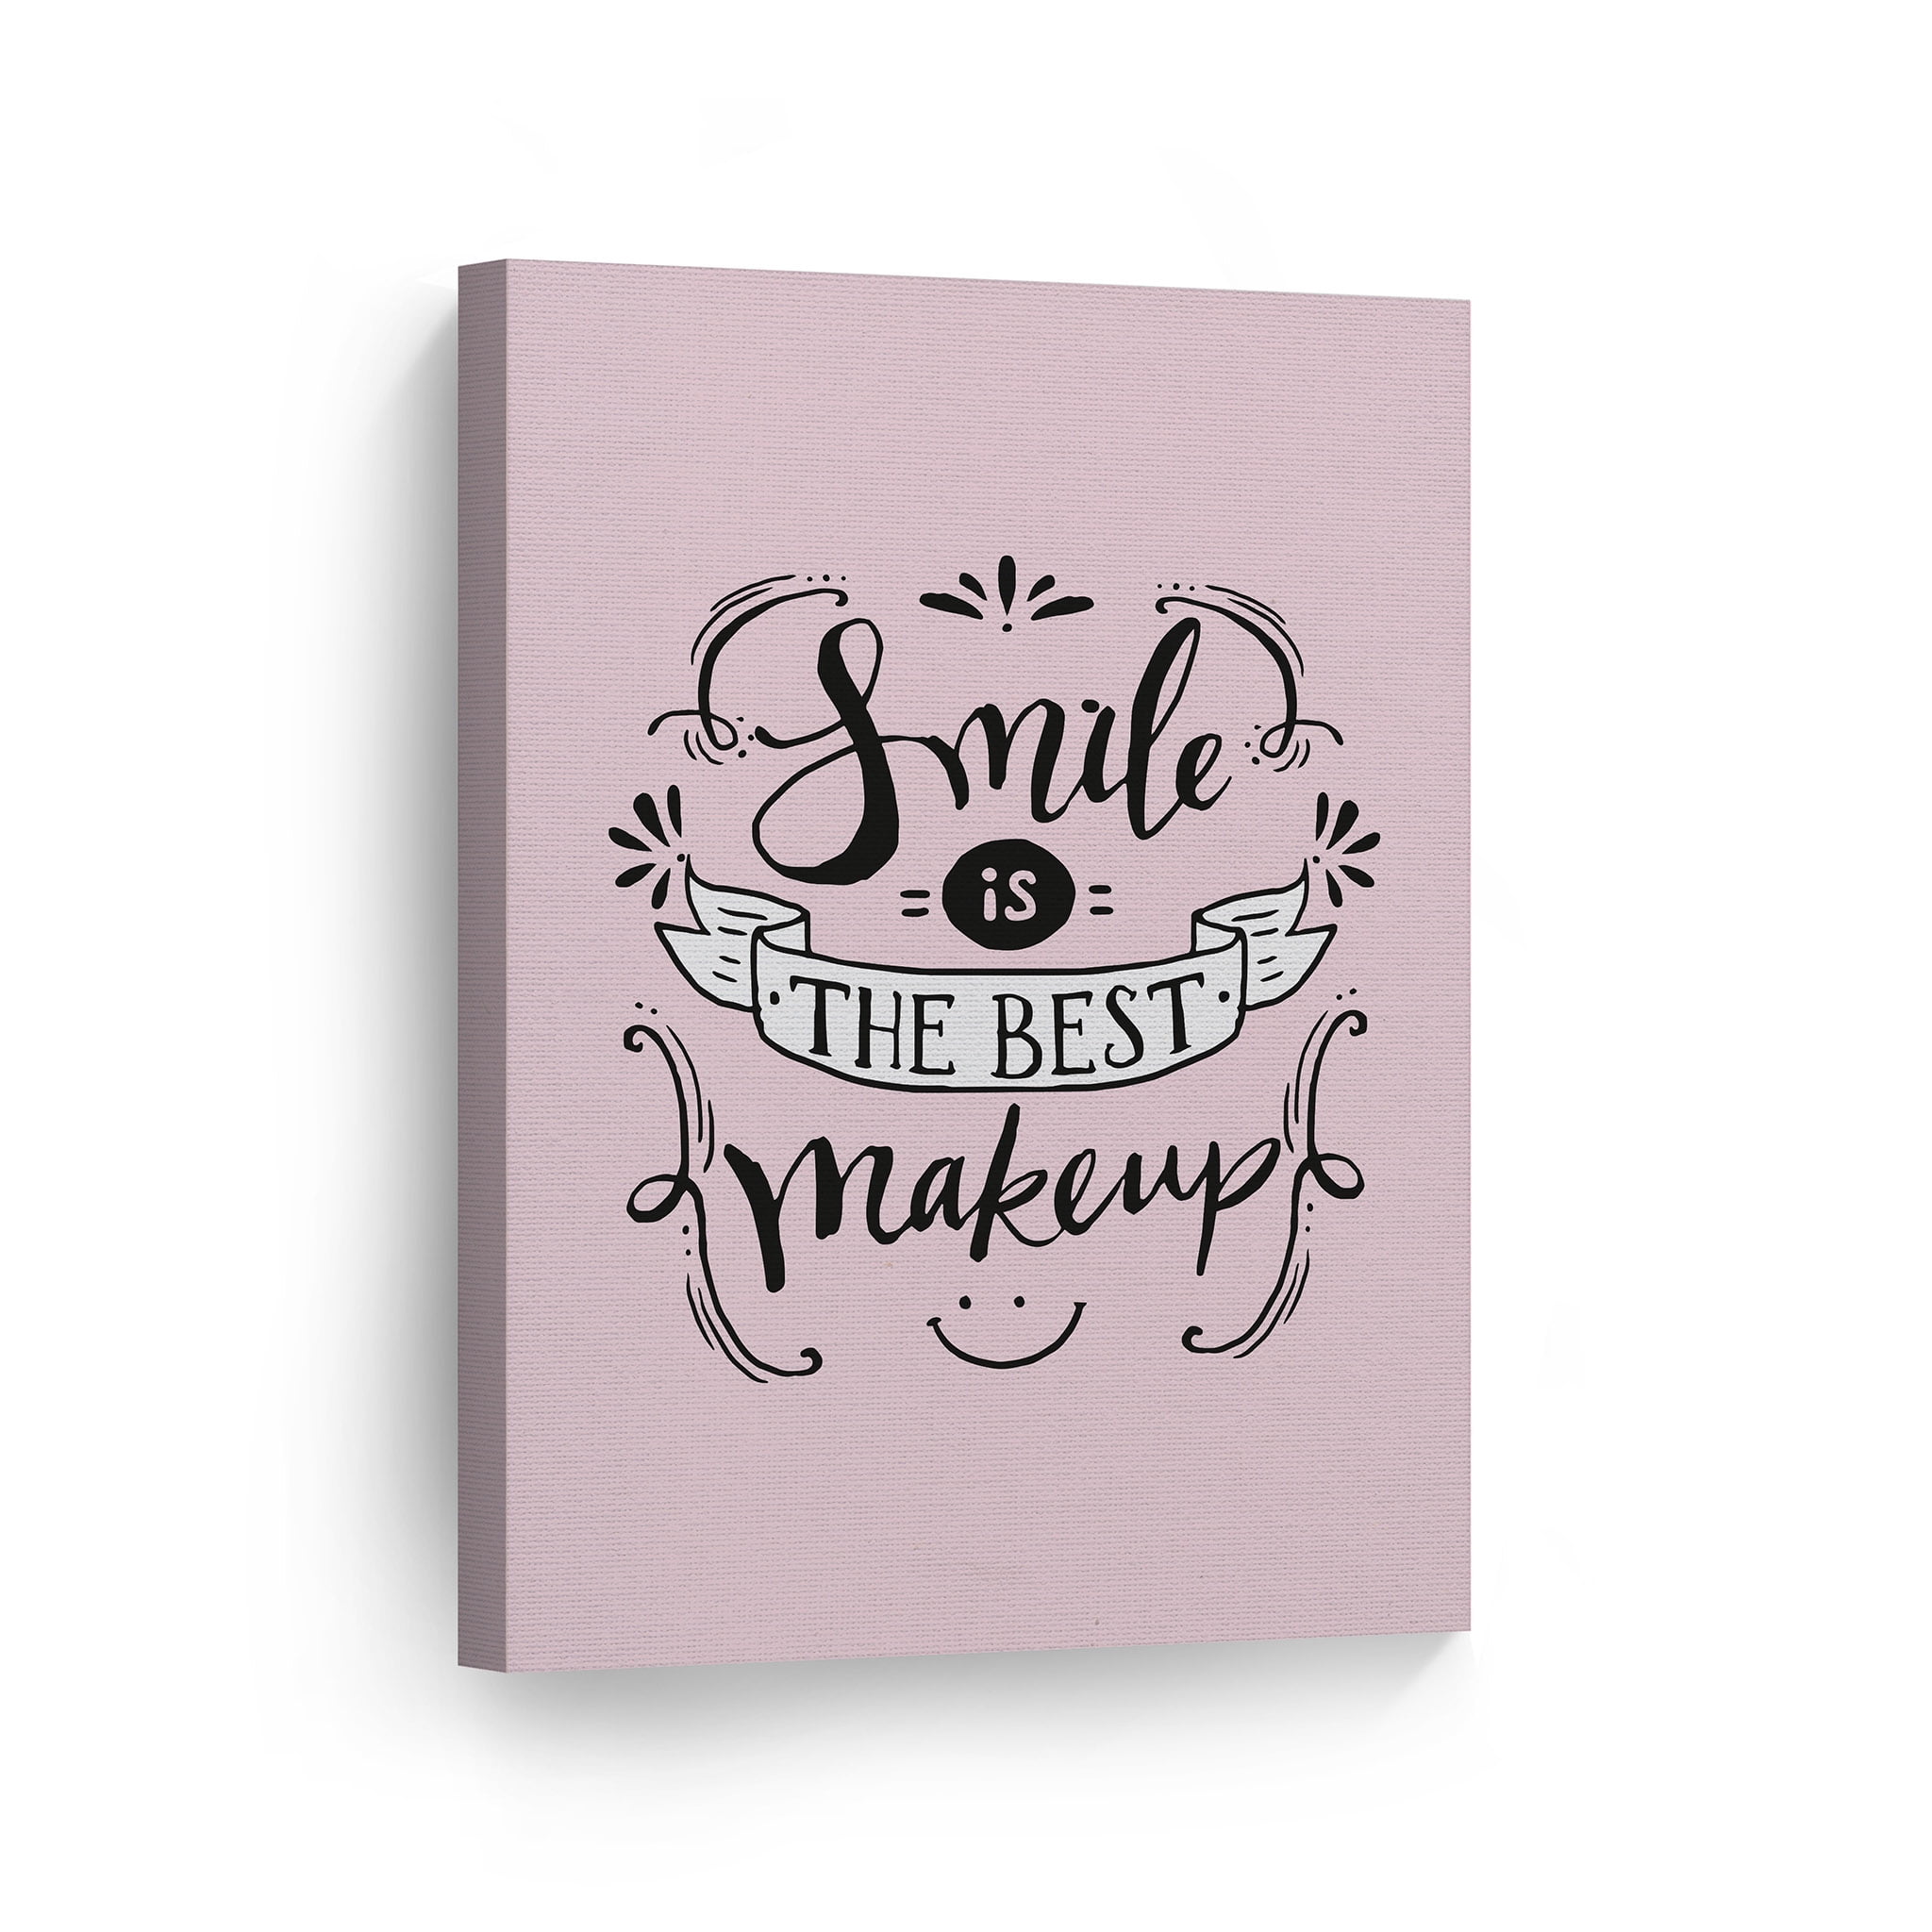 Smile is the best makeup Quotation Wall Decor Art Print on Dictionary page 